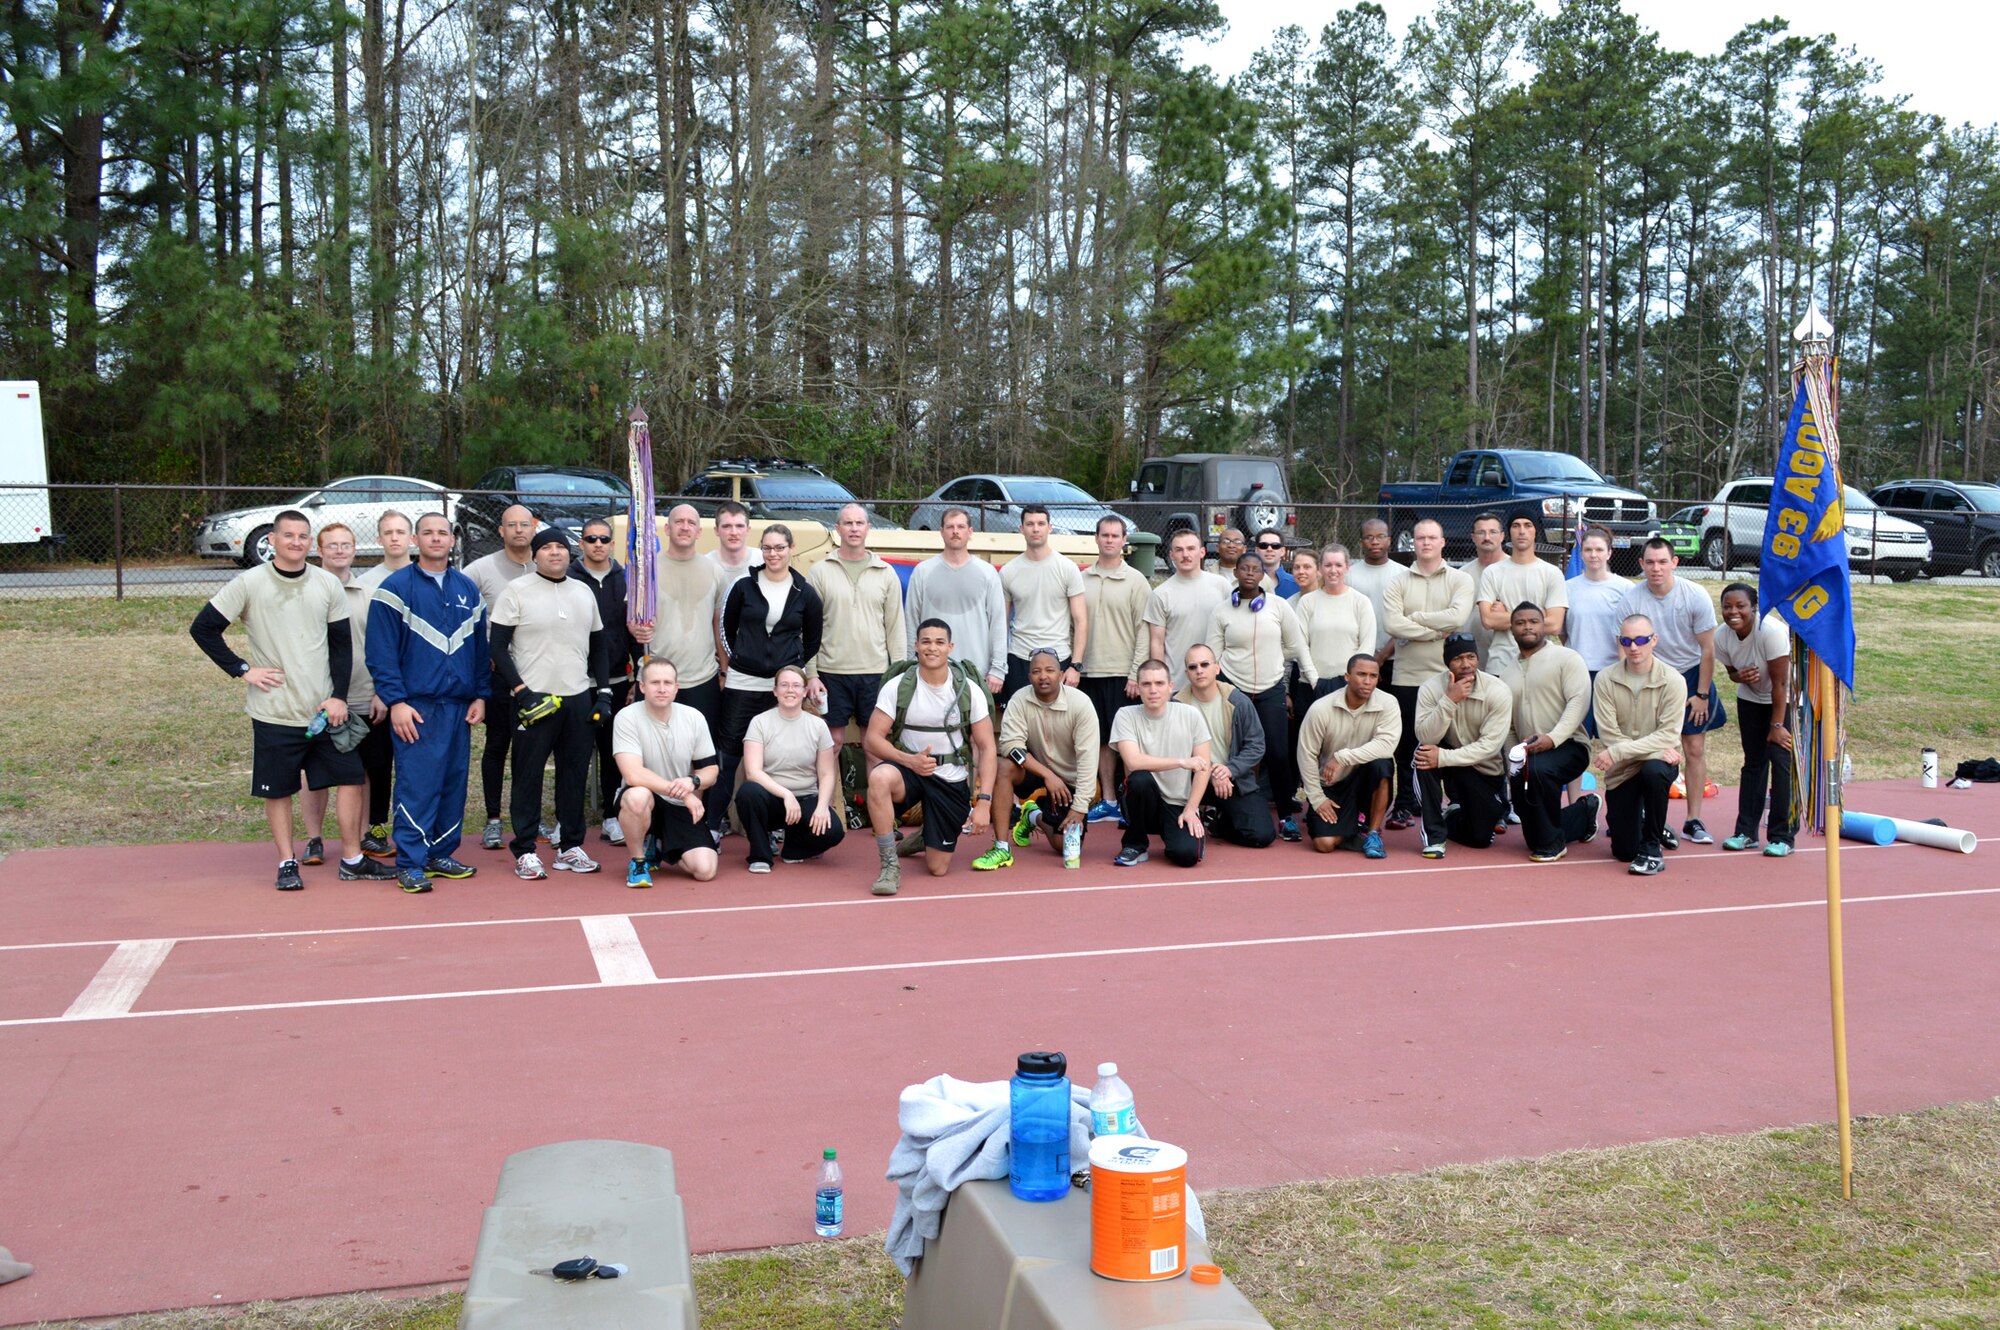 Tactical Air Control Party Airmen assigned to Pope Army Airfield, Fort Bragg, N.C. pose for a group photo during the third annual worldwide TACP 24-hour Run Challenge fundraising event on March 28 held at the Hedrick Stadium track. The event is held to honor and raise funds for fallen TACP brothers in arms and their families. TACP airmen from the 18th Air Support Operations Group, 14th Air Support Operations Squadron, 682nd Air Support Operations Squadron and the 18th Weather Squadron accumulated over 2,500 miles during this year’s event at Pope. (U.S. Air Force photo/Marvin Krause)